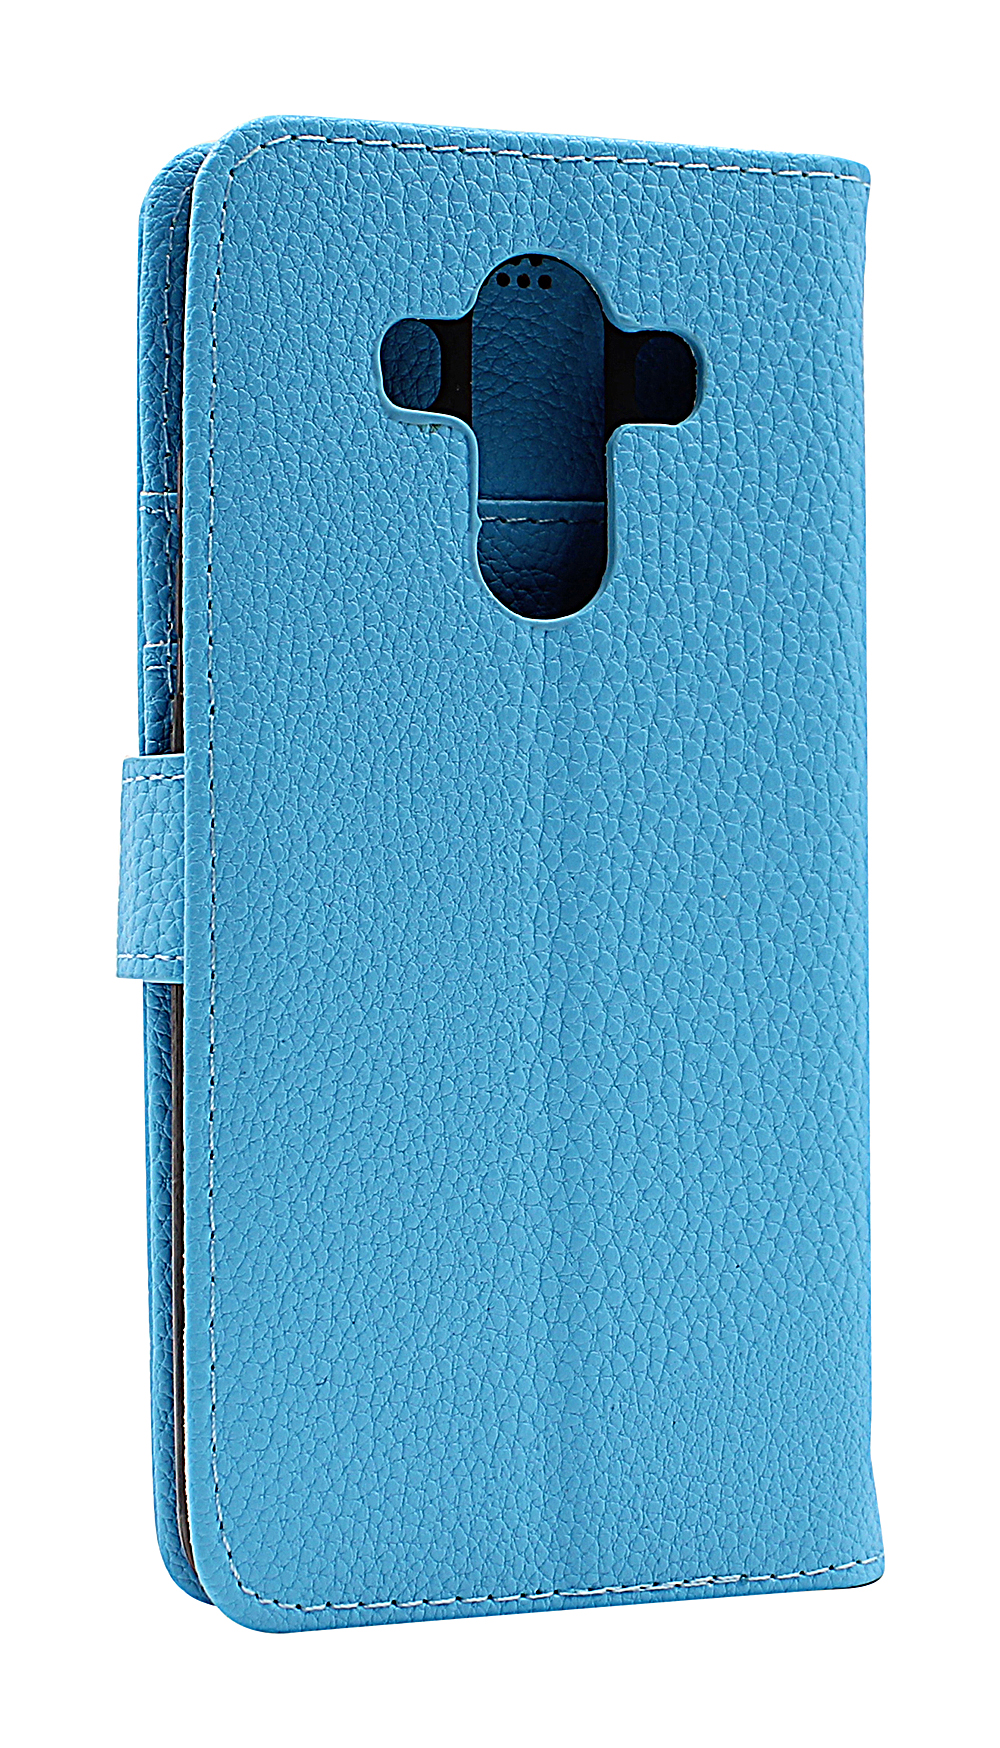 New Standcase Wallet Huawei Mate 10 Pro